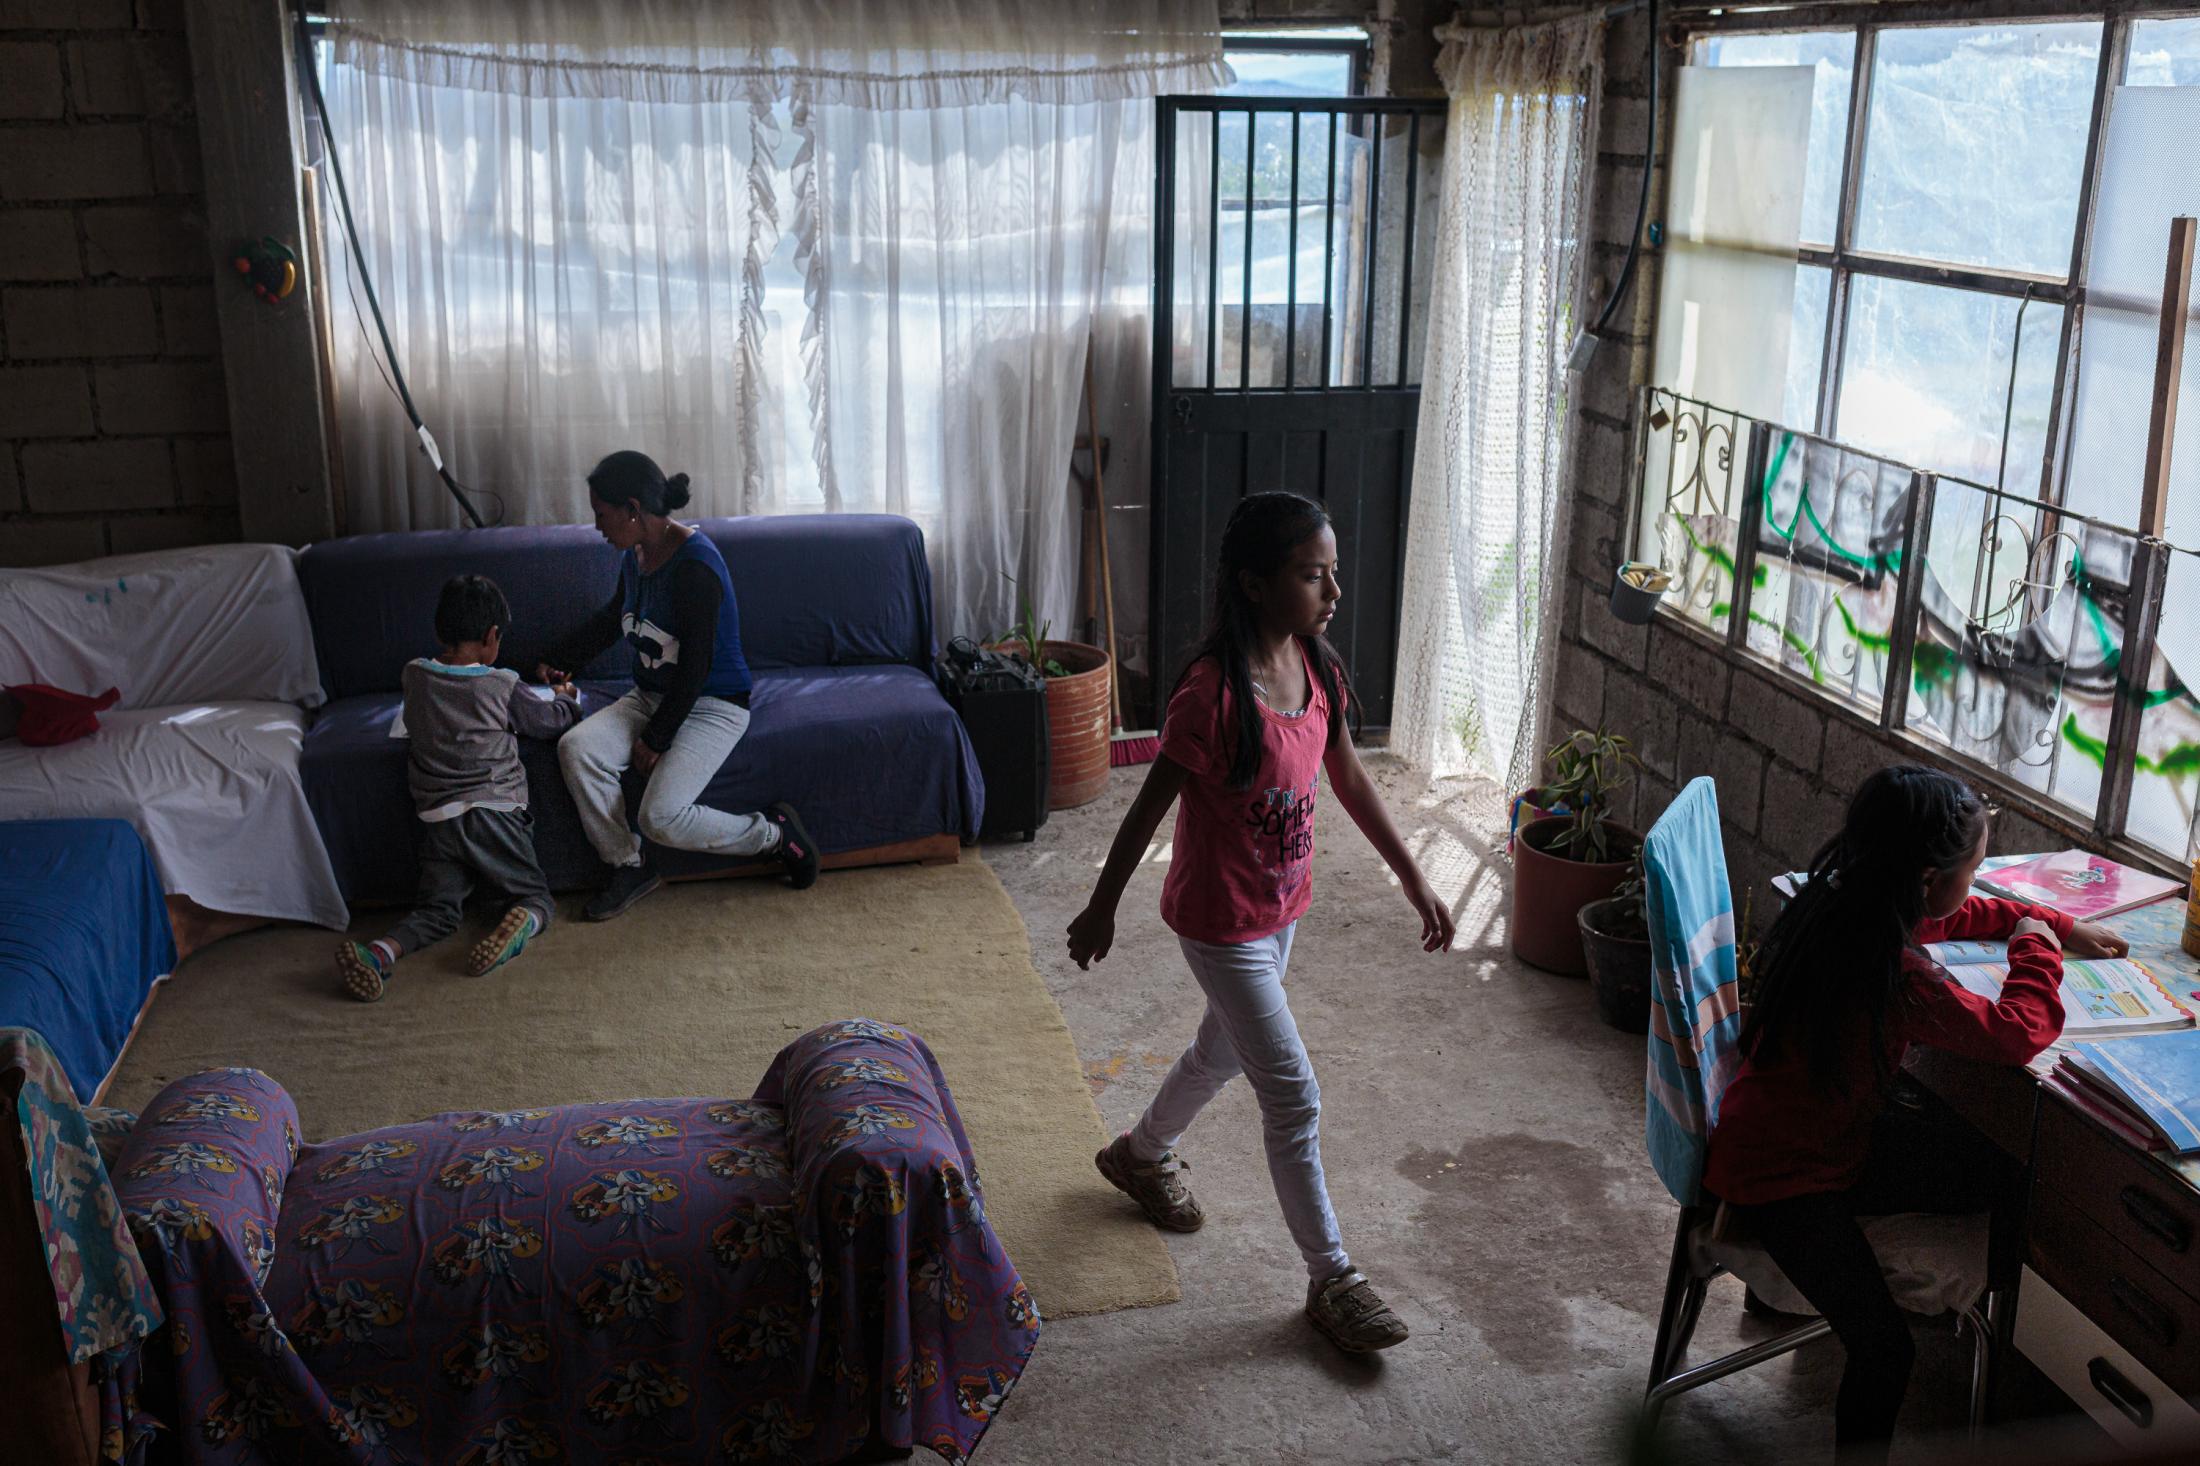 Maribel Loacham&iacute;n (32) helps her son Angelo Andrade (7) with his homework in the living room, while her older daughter Sof&iacute;a Andrade (11) helps her other daughter Sarah&iacute; (9) at her desk. They don&#39;t have a phone so they can receive homework through Whatsapp. The teacher comes once a week to drop off printed homework guides for the entire week. June 22, 2020. Cotogchoa-Ecuador. Andr&eacute;s Y&eacute;pez